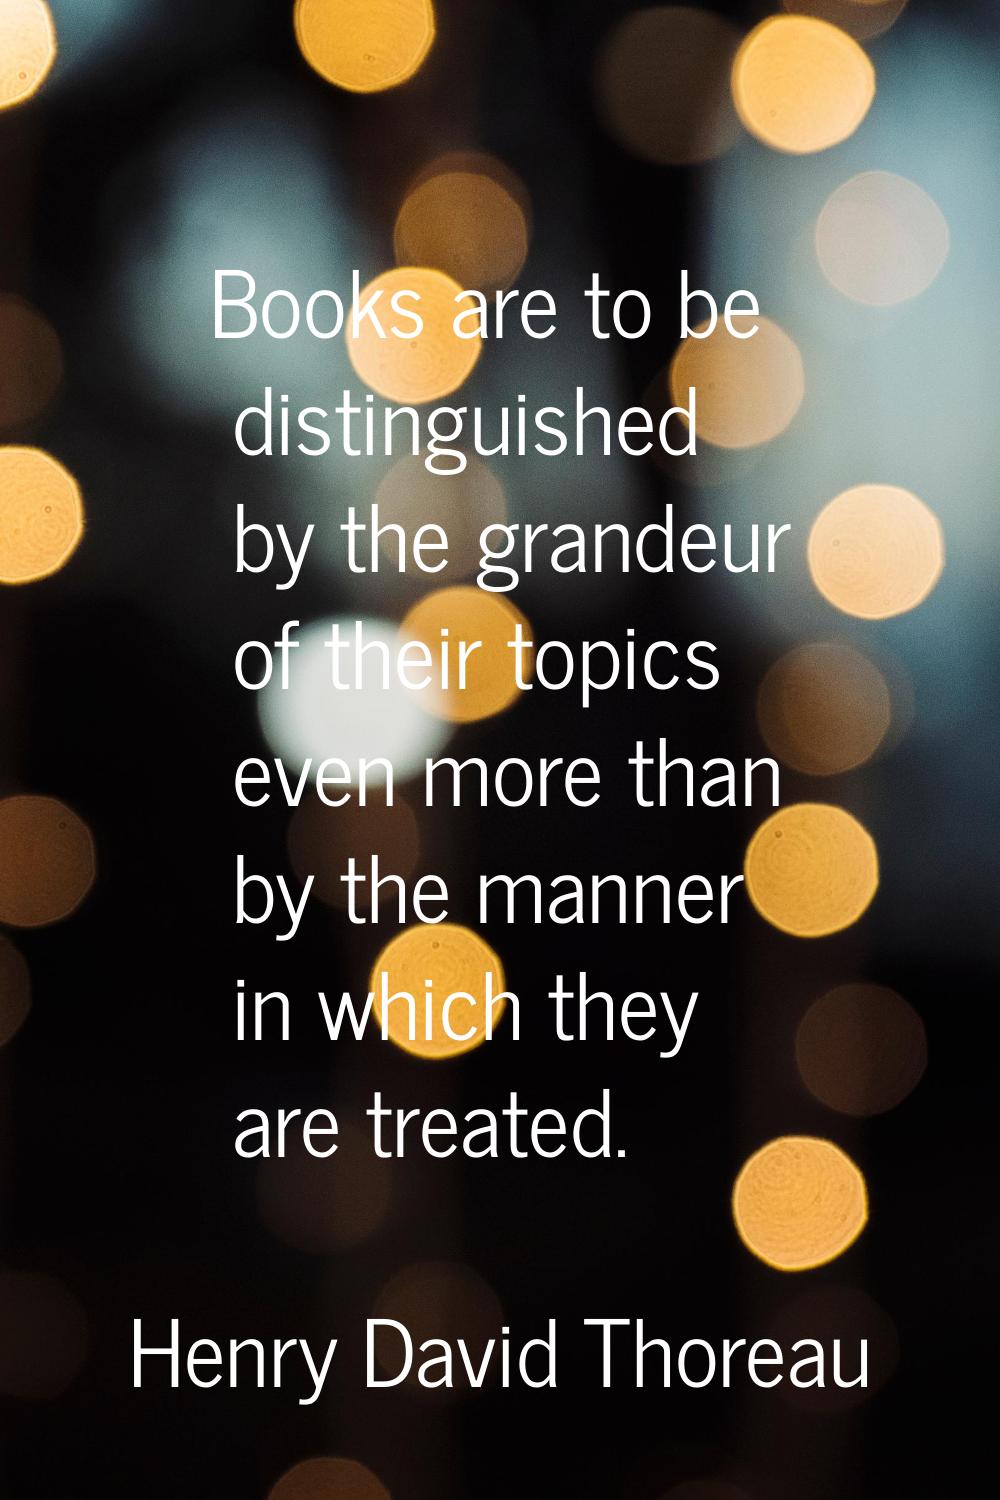 Books are to be distinguished by the grandeur of their topics even more than by the manner in which